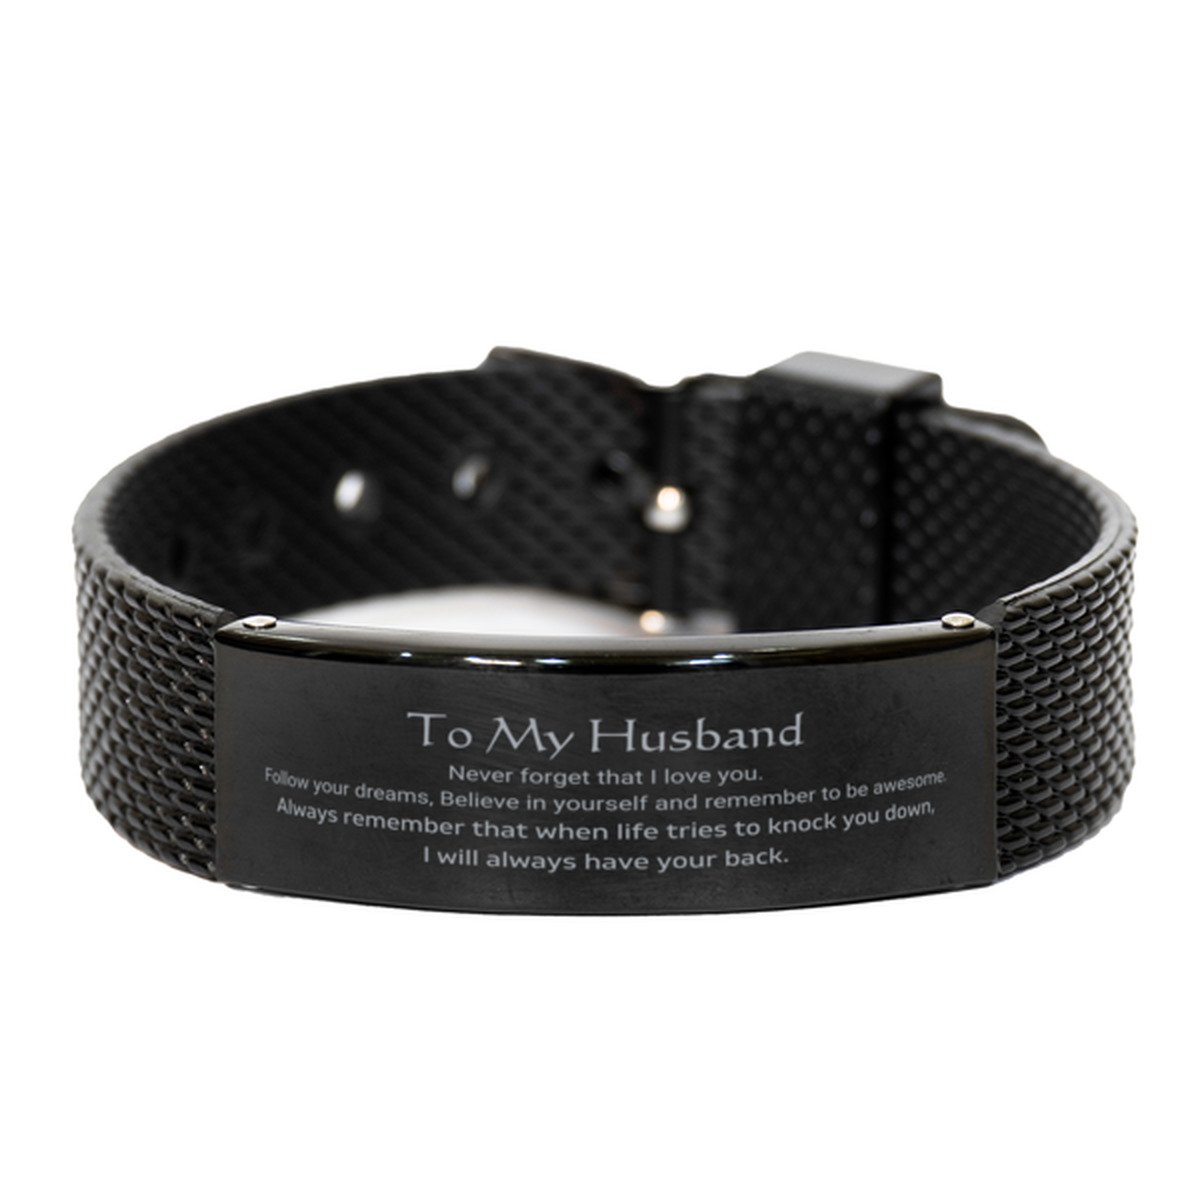 Inspirational Gifts for Husband, Follow your dreams, Believe in yourself, Husband Black Shark Mesh Bracelet, Birthday Christmas Unique Gifts For Husband